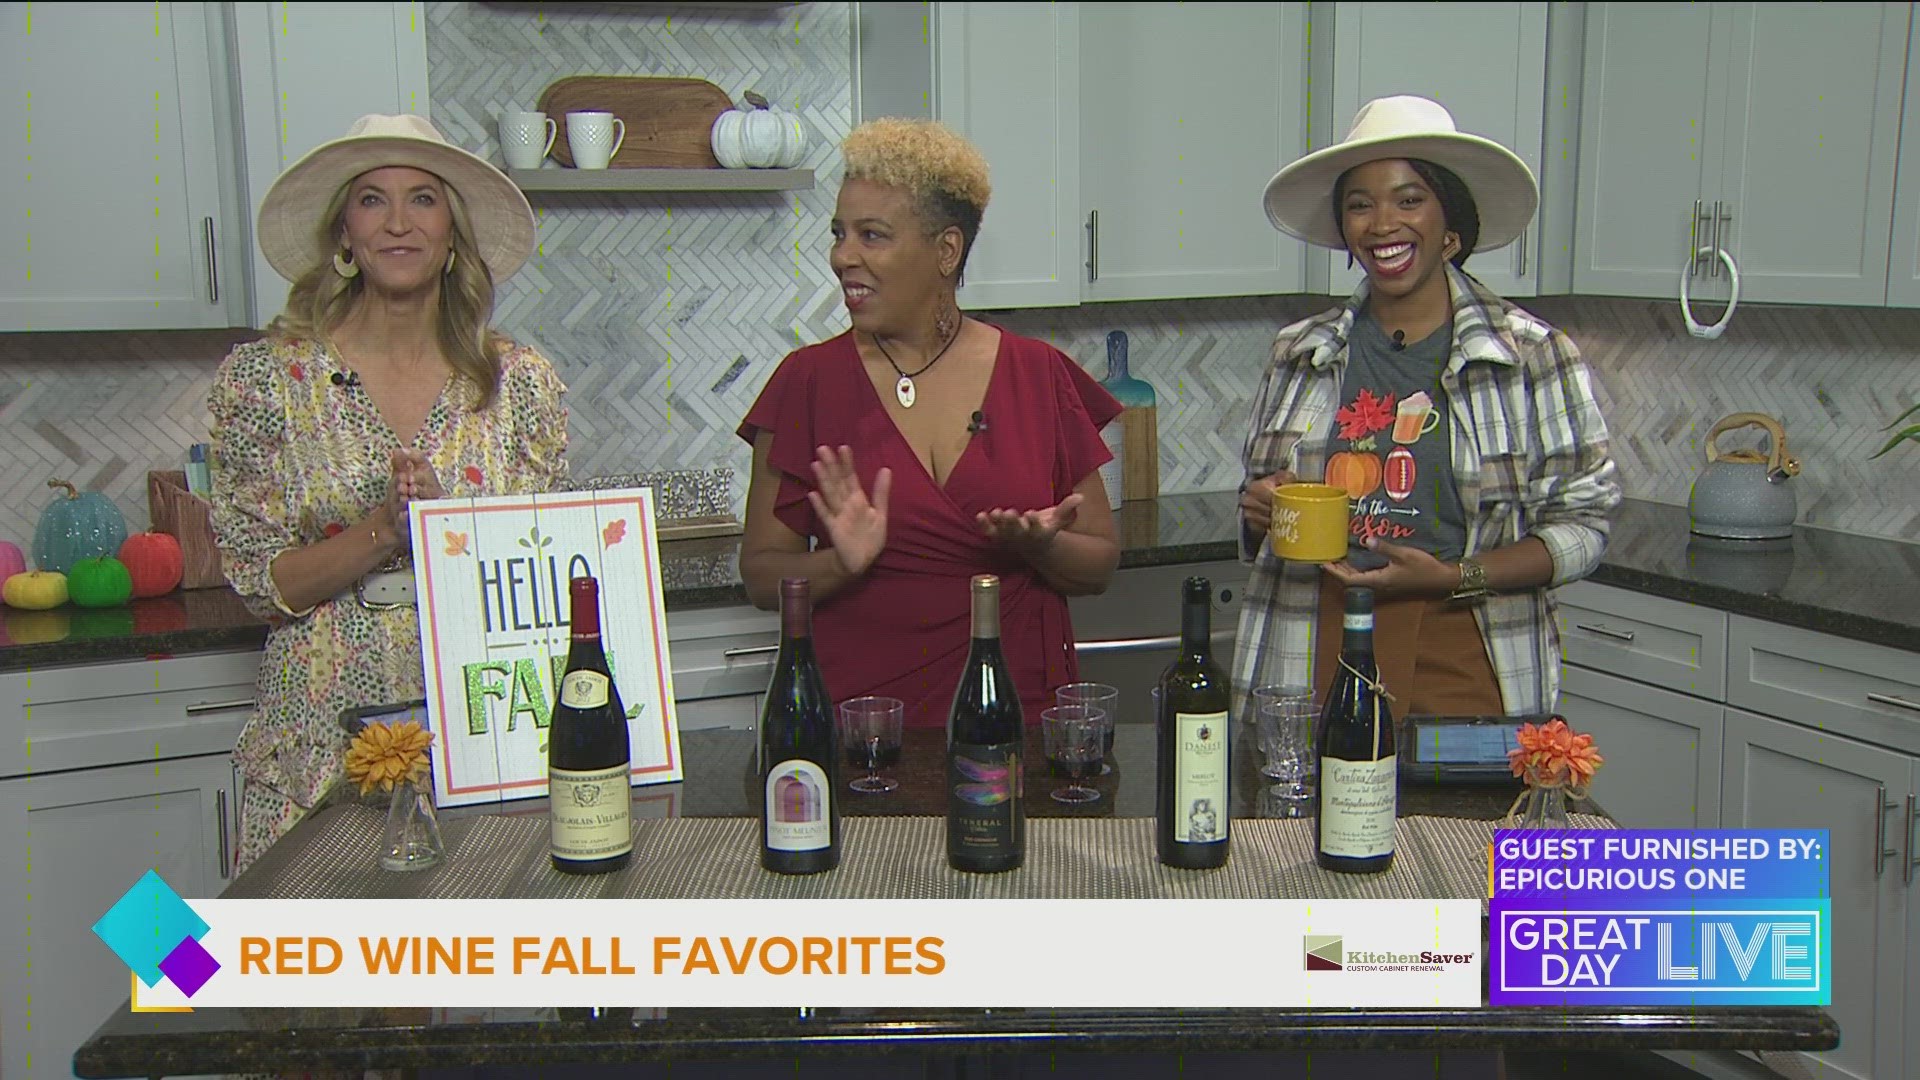 Stephanie Love from Epicurious One joined us with her red wine picks for Fall.